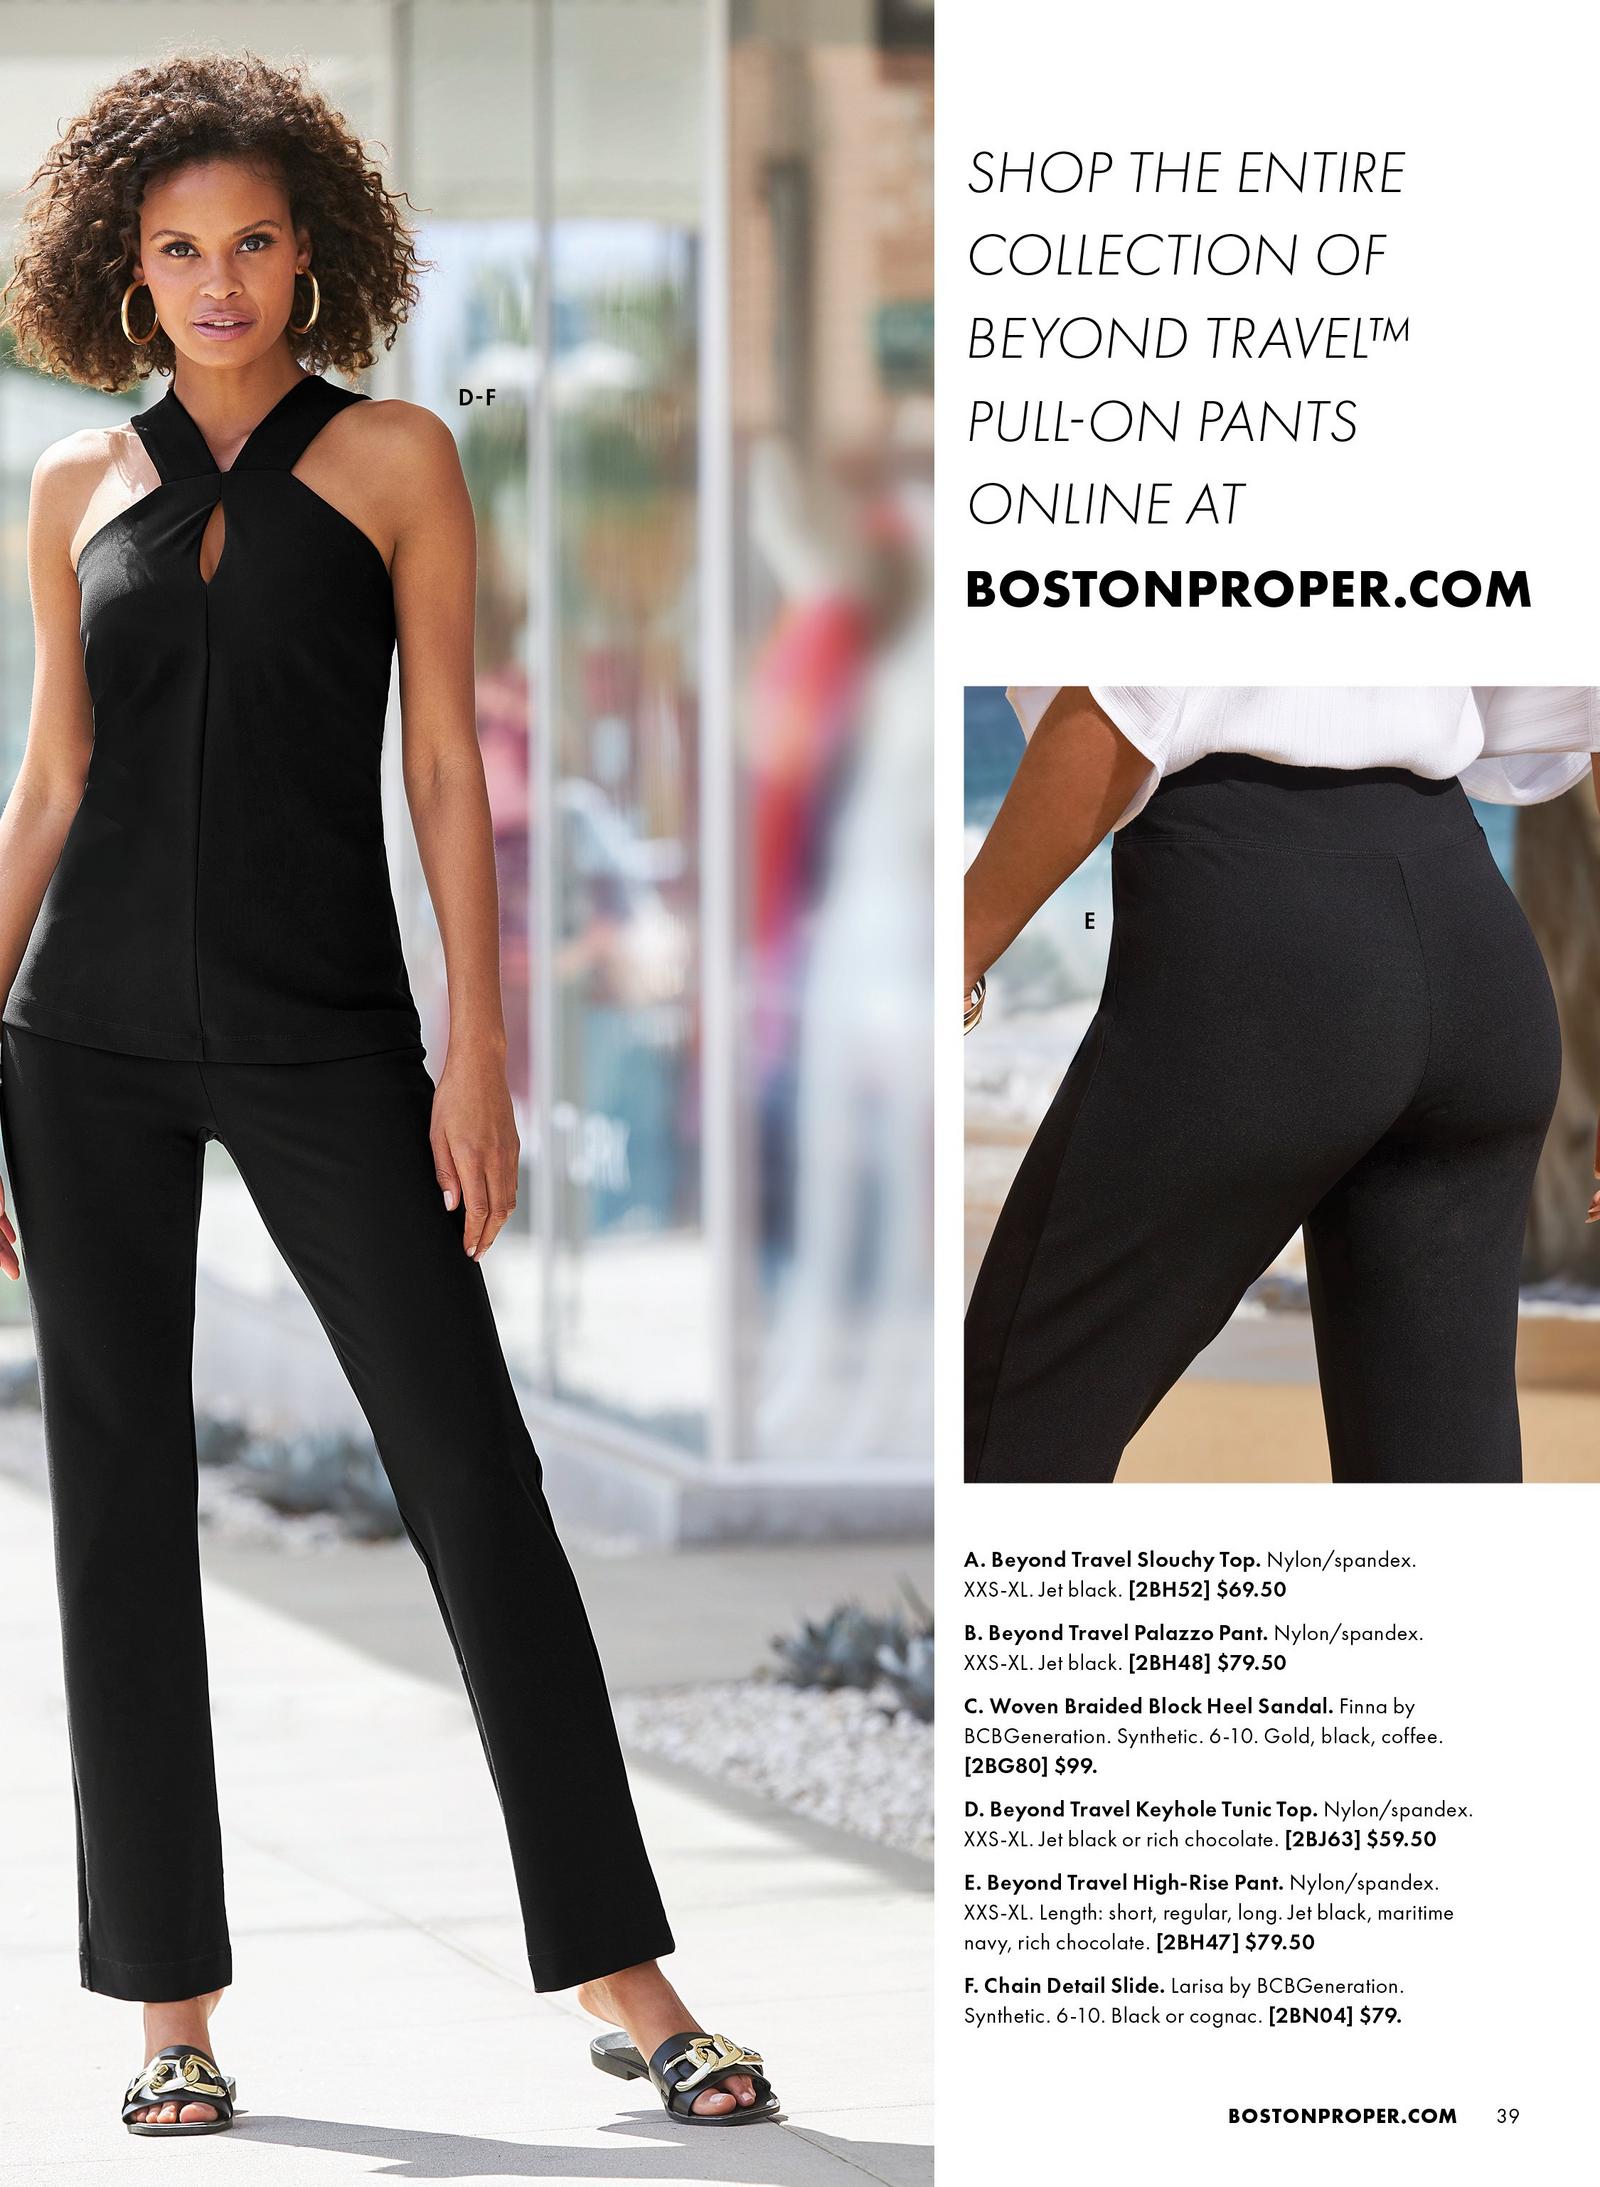 Model is wearing the beyond travel keyhole tunic top, the beyond travel high rise pant and the chain detail slides. Shown again are the Beyond Travel High rise pant.